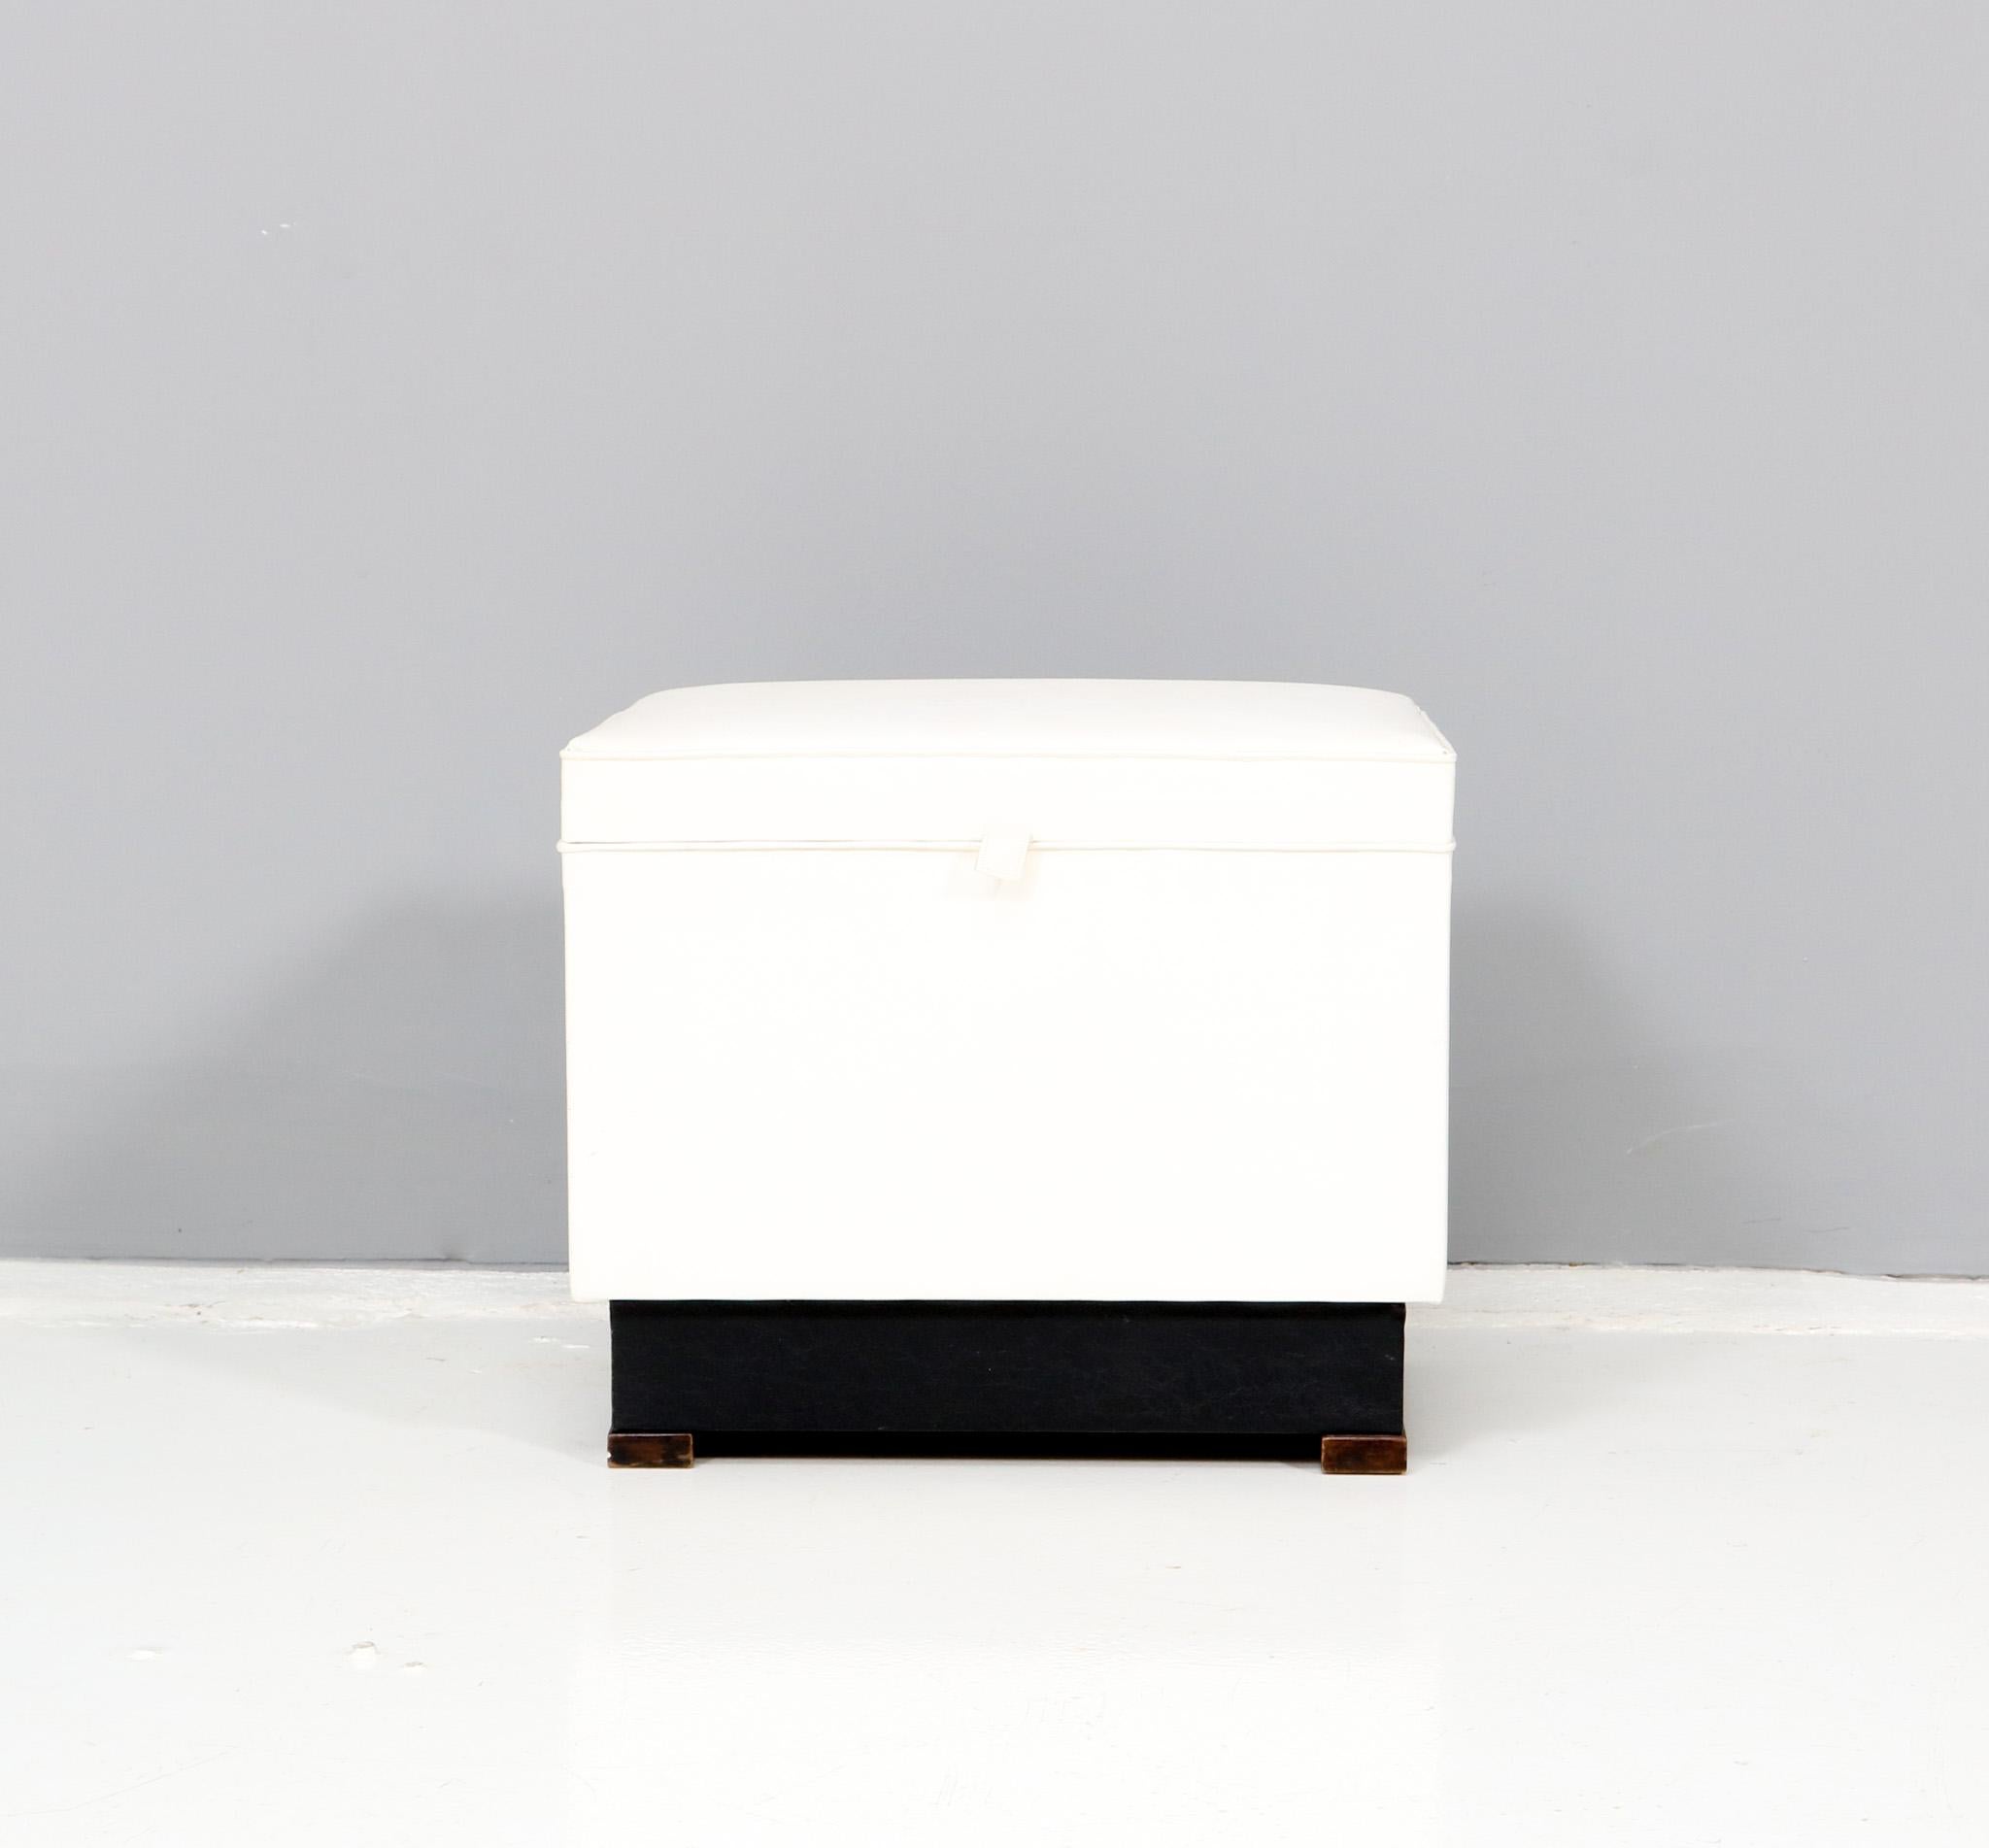 Dutch Faux Leather Art Deco Modernist Box or Stool by 't Woonhuys Amsterdam, 1930s